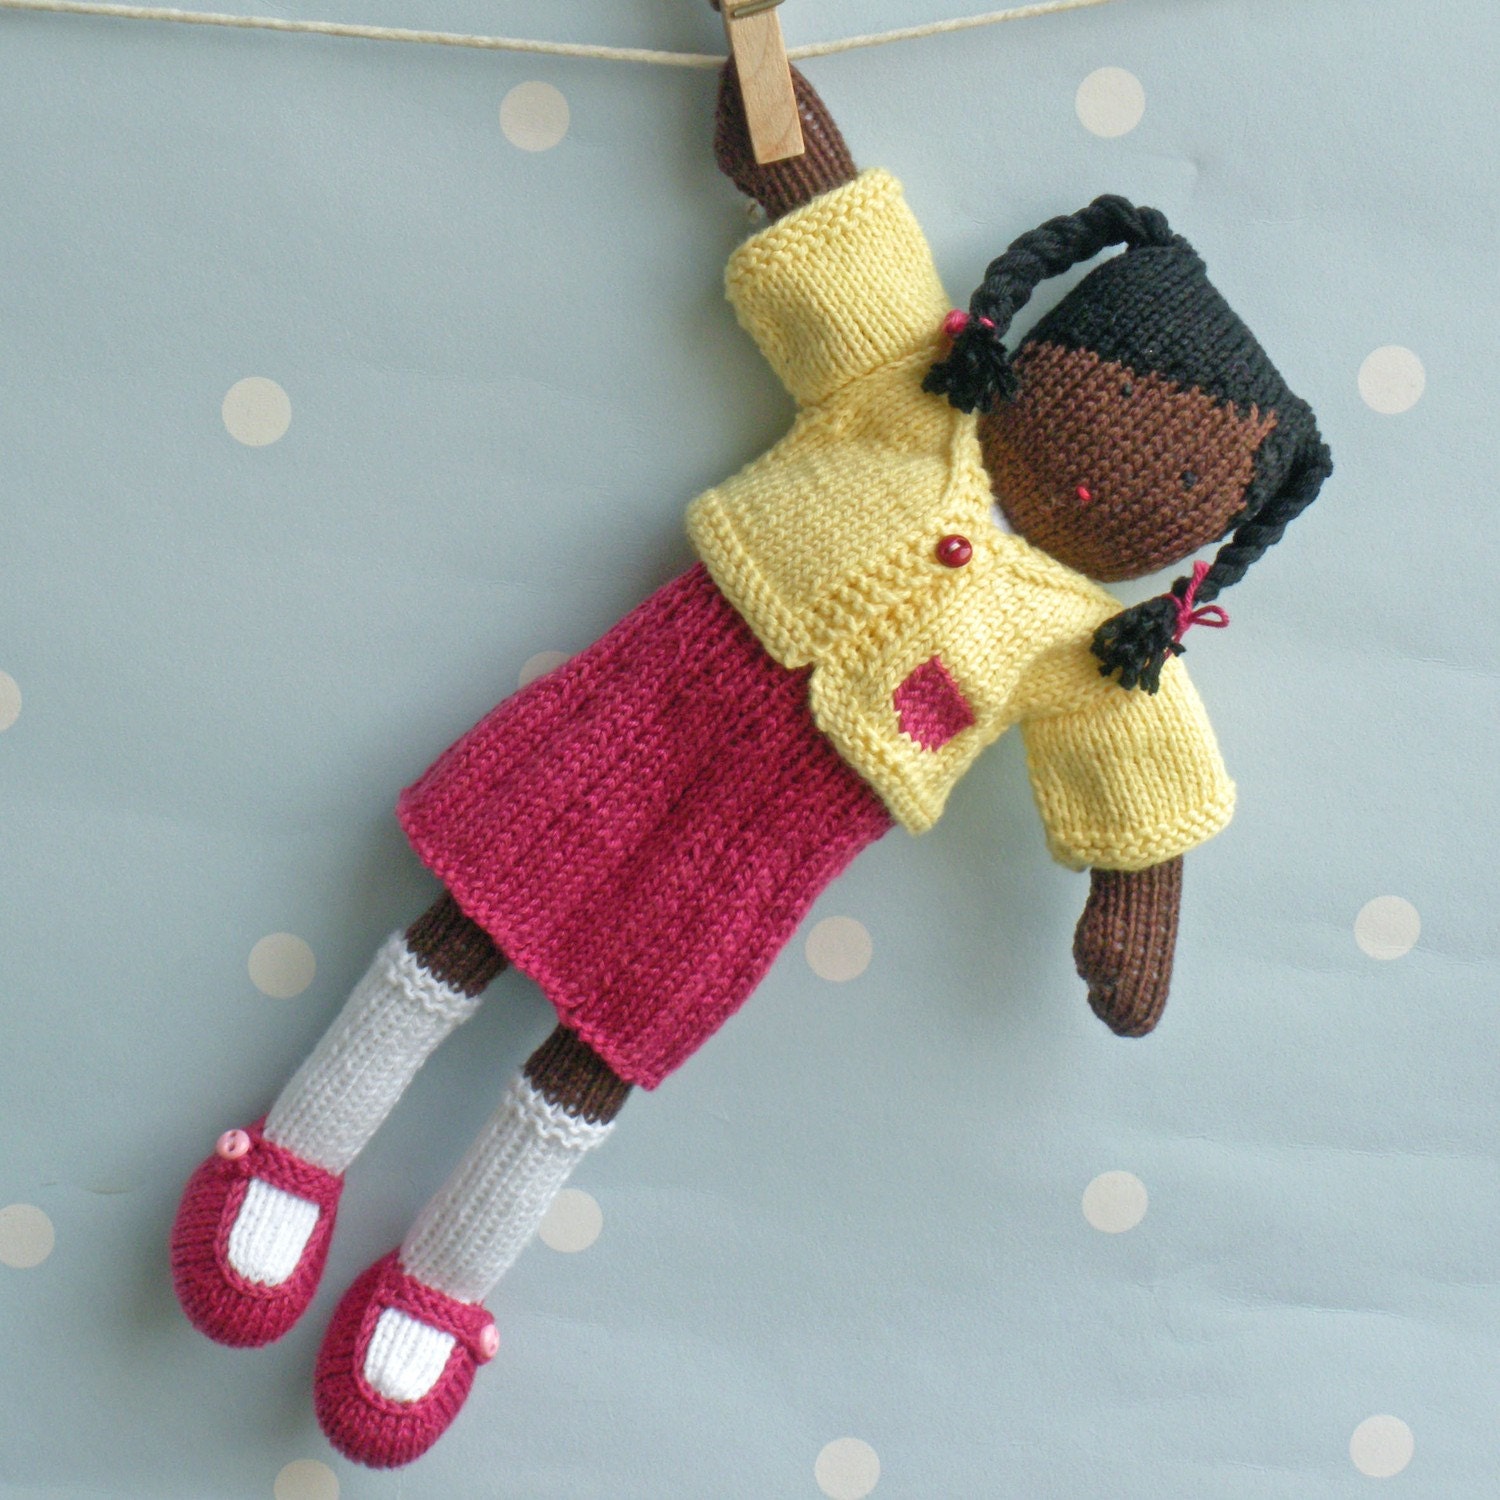 Kora - hand knitted doll, traditionally inspired and unique - 12 inches tall